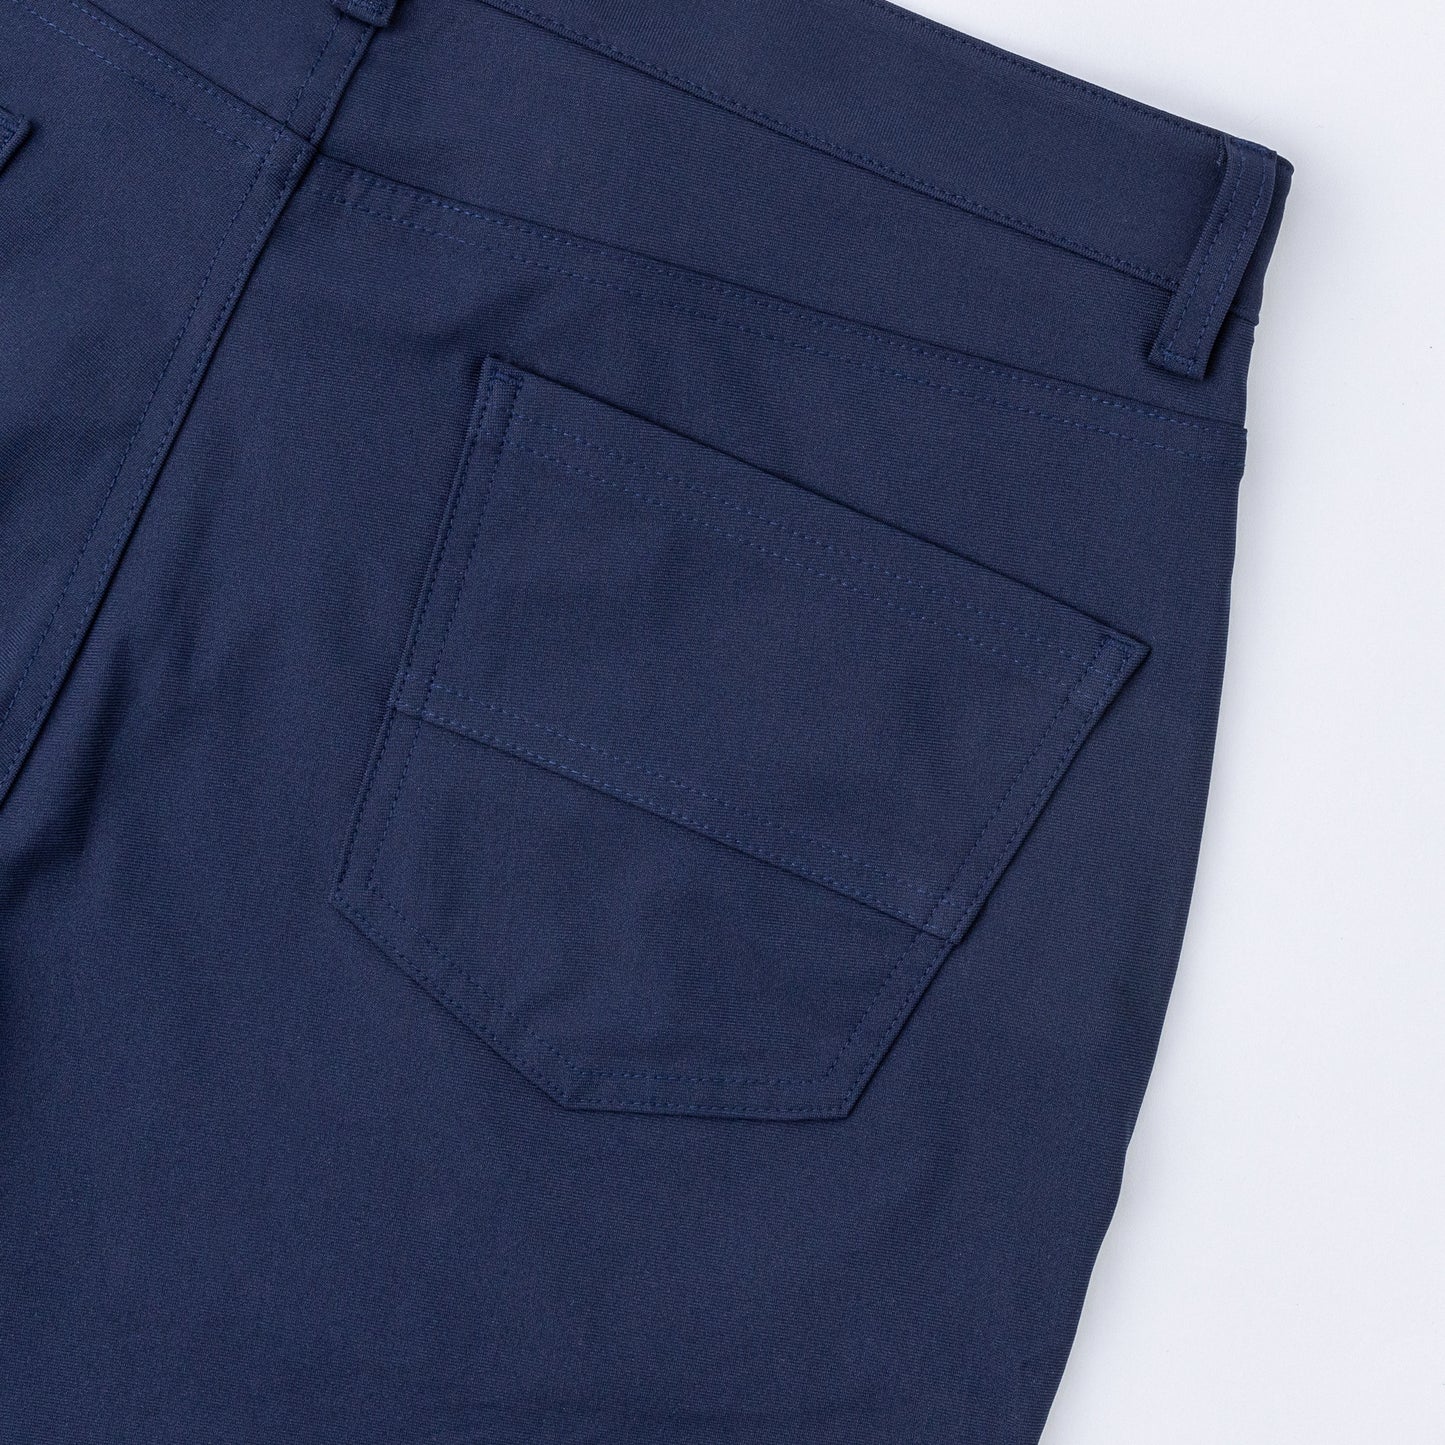 Performance Five-Pocket Four Way Stretch Pant - Available in 5 Colors